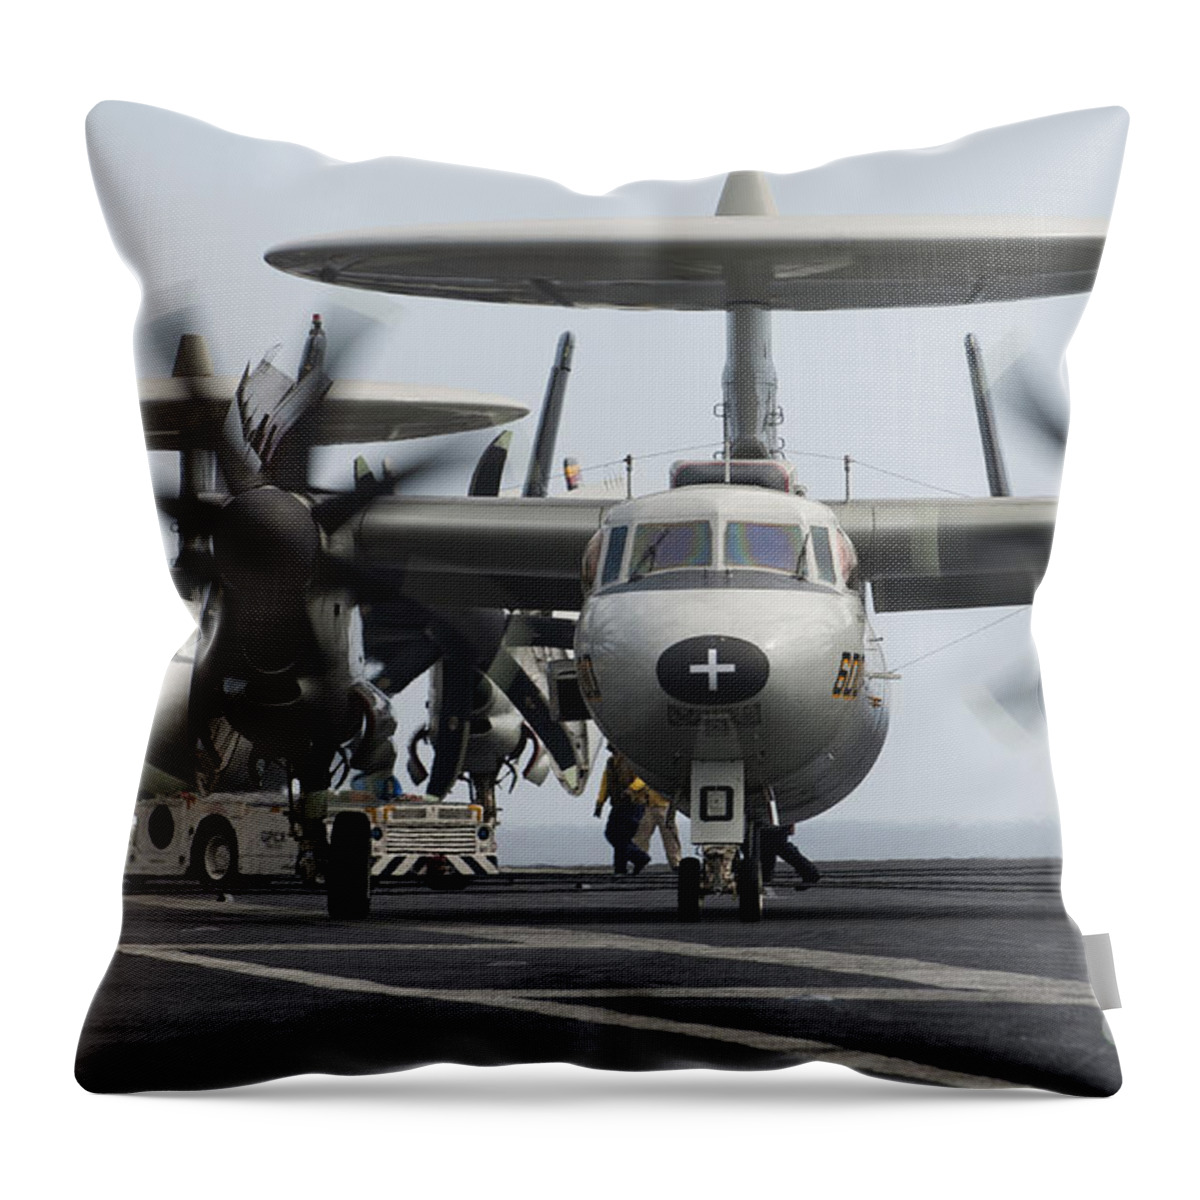 Taxiing Throw Pillow featuring the photograph An E-2c Hawkeye Aircraft On The Flight by Stocktrek Images